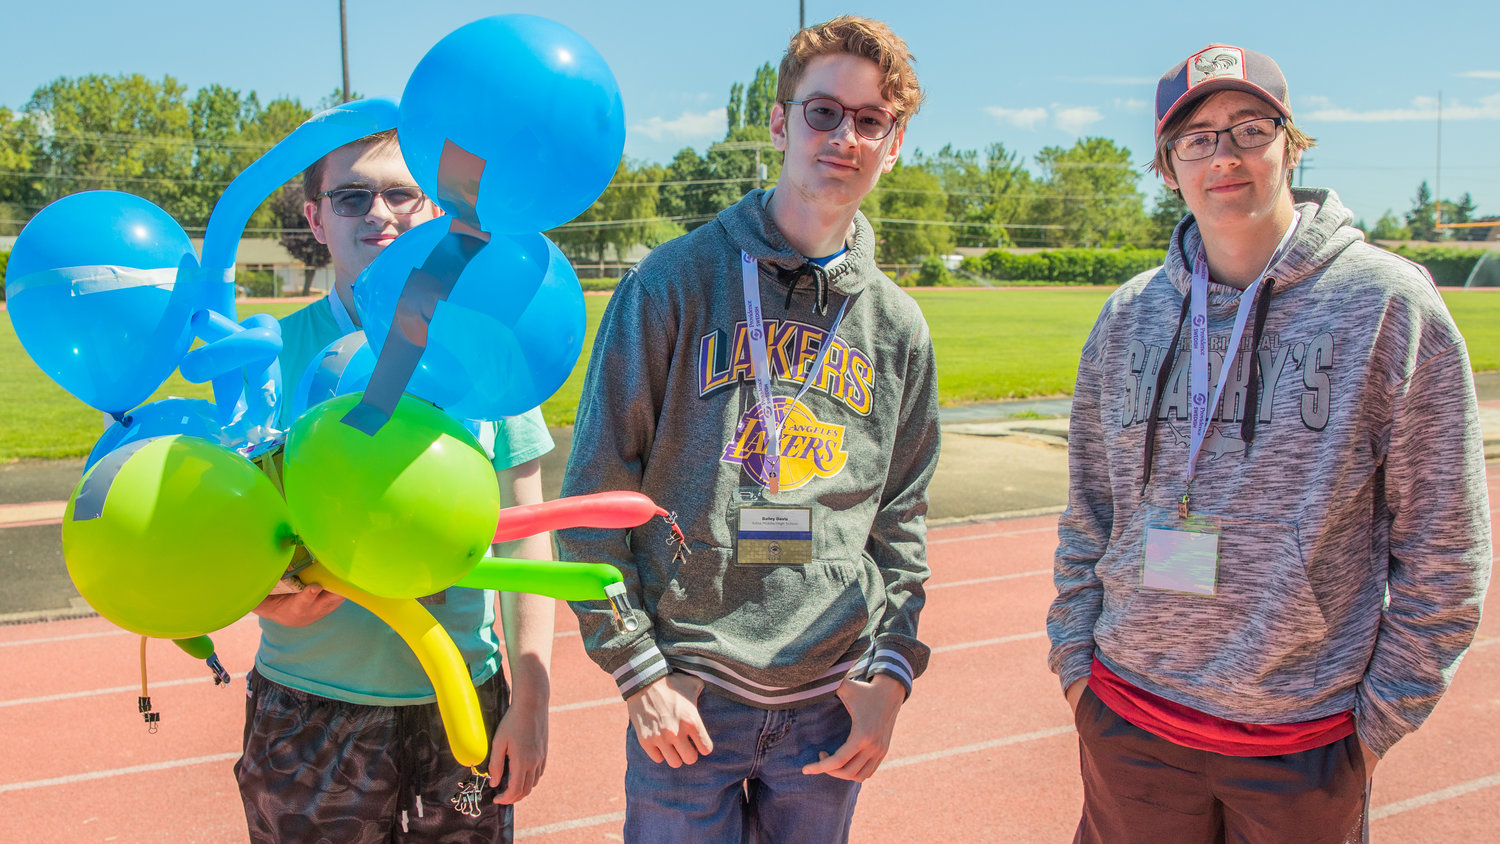 Wyatt Peek, of Toledo, Bailey Davis, of Adna and Canon Rupert of Chehalis pose for a photo with their project Tuesday afternoon at Bearcat Stadium.